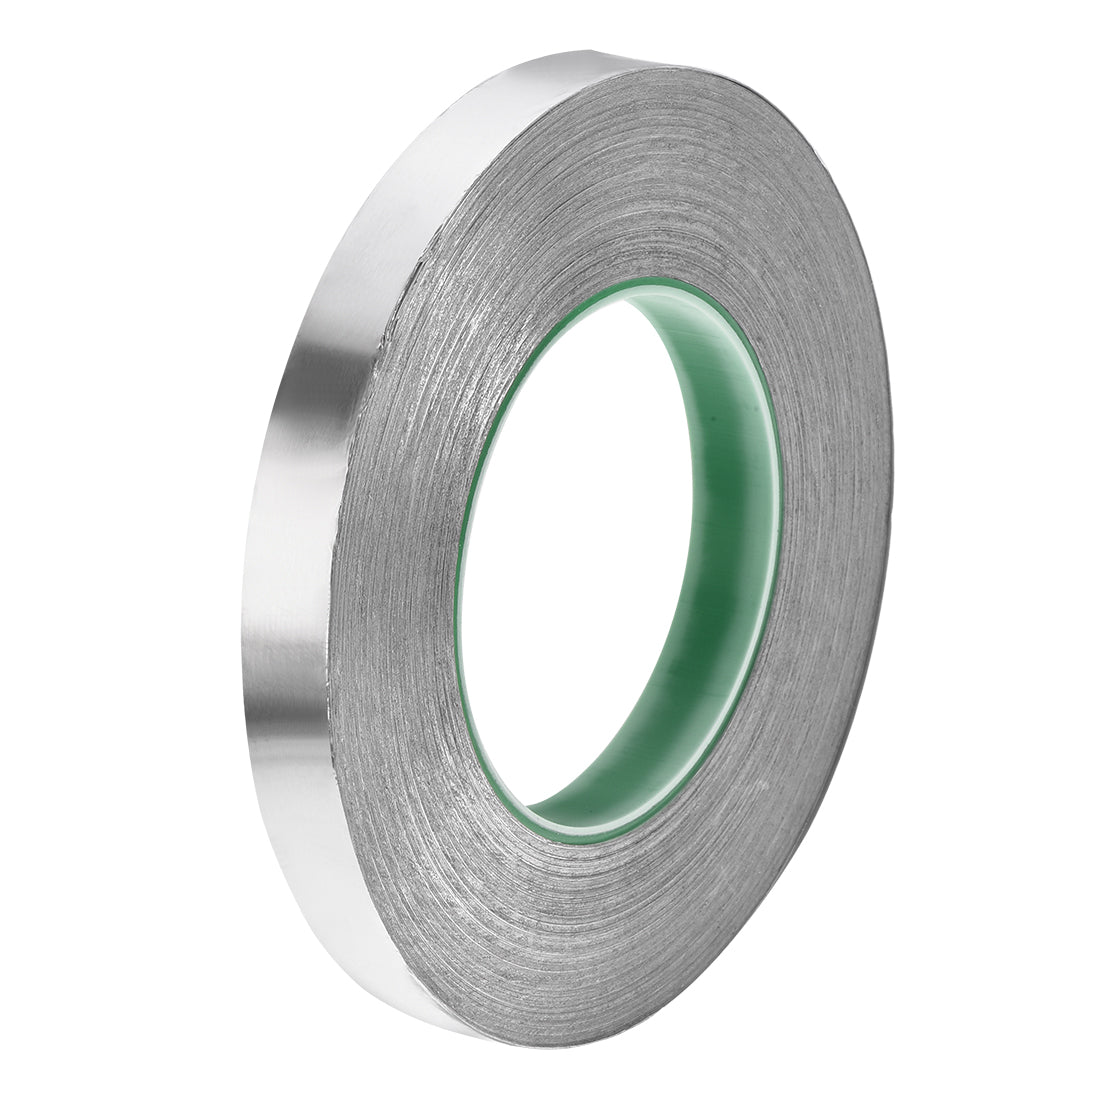 uxcell Uxcell 15mm Aluminum Foil Tape for HVAC,Patching Hot and Cold Air Ducts 50m/164ft